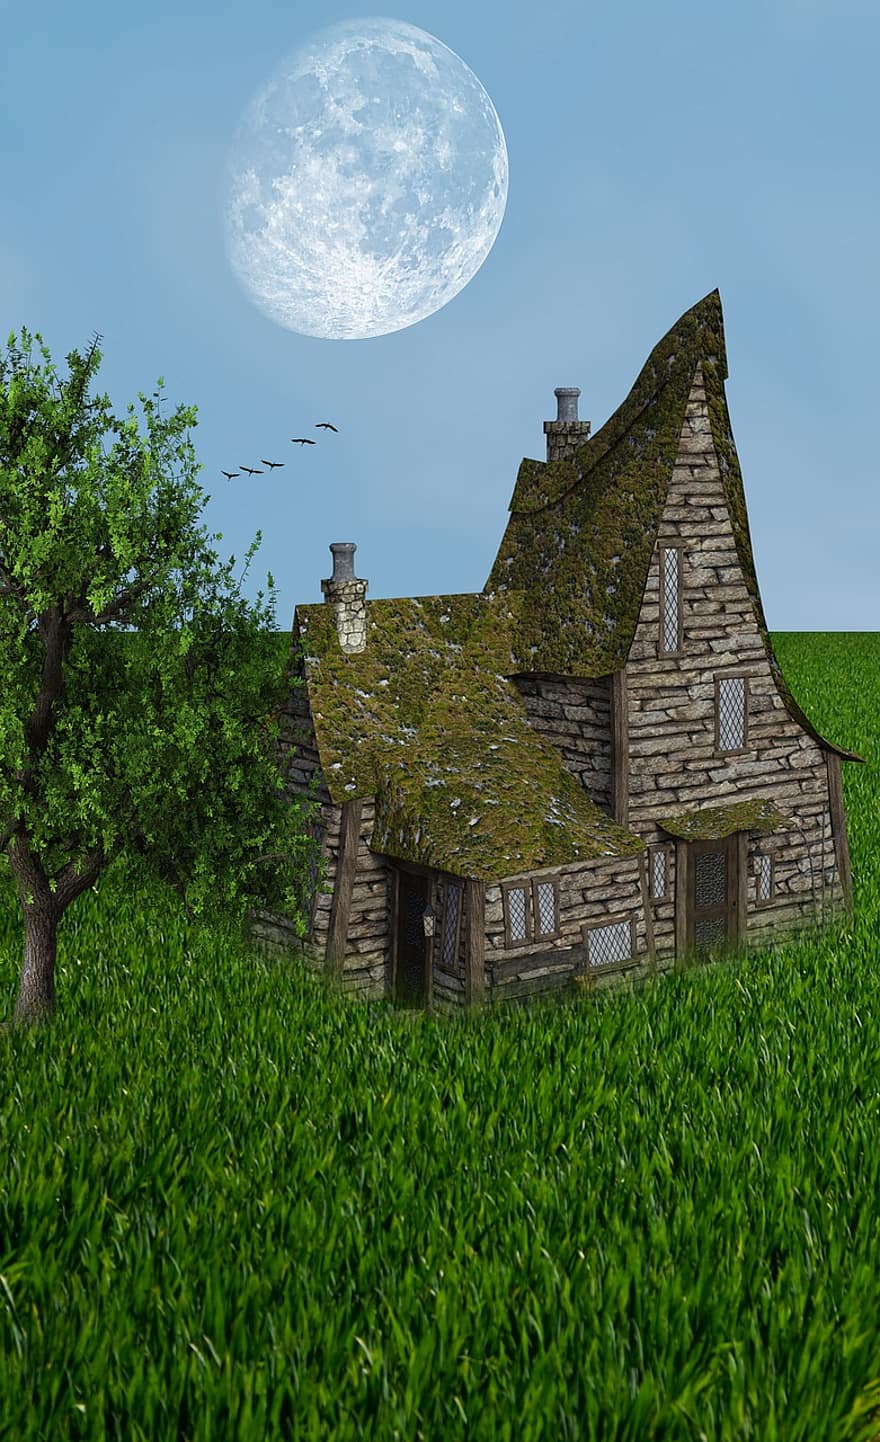 Nature, House, Rural, Rustic, Grass, Field, Moon, Calm, The Moon, Take It Easy, Green